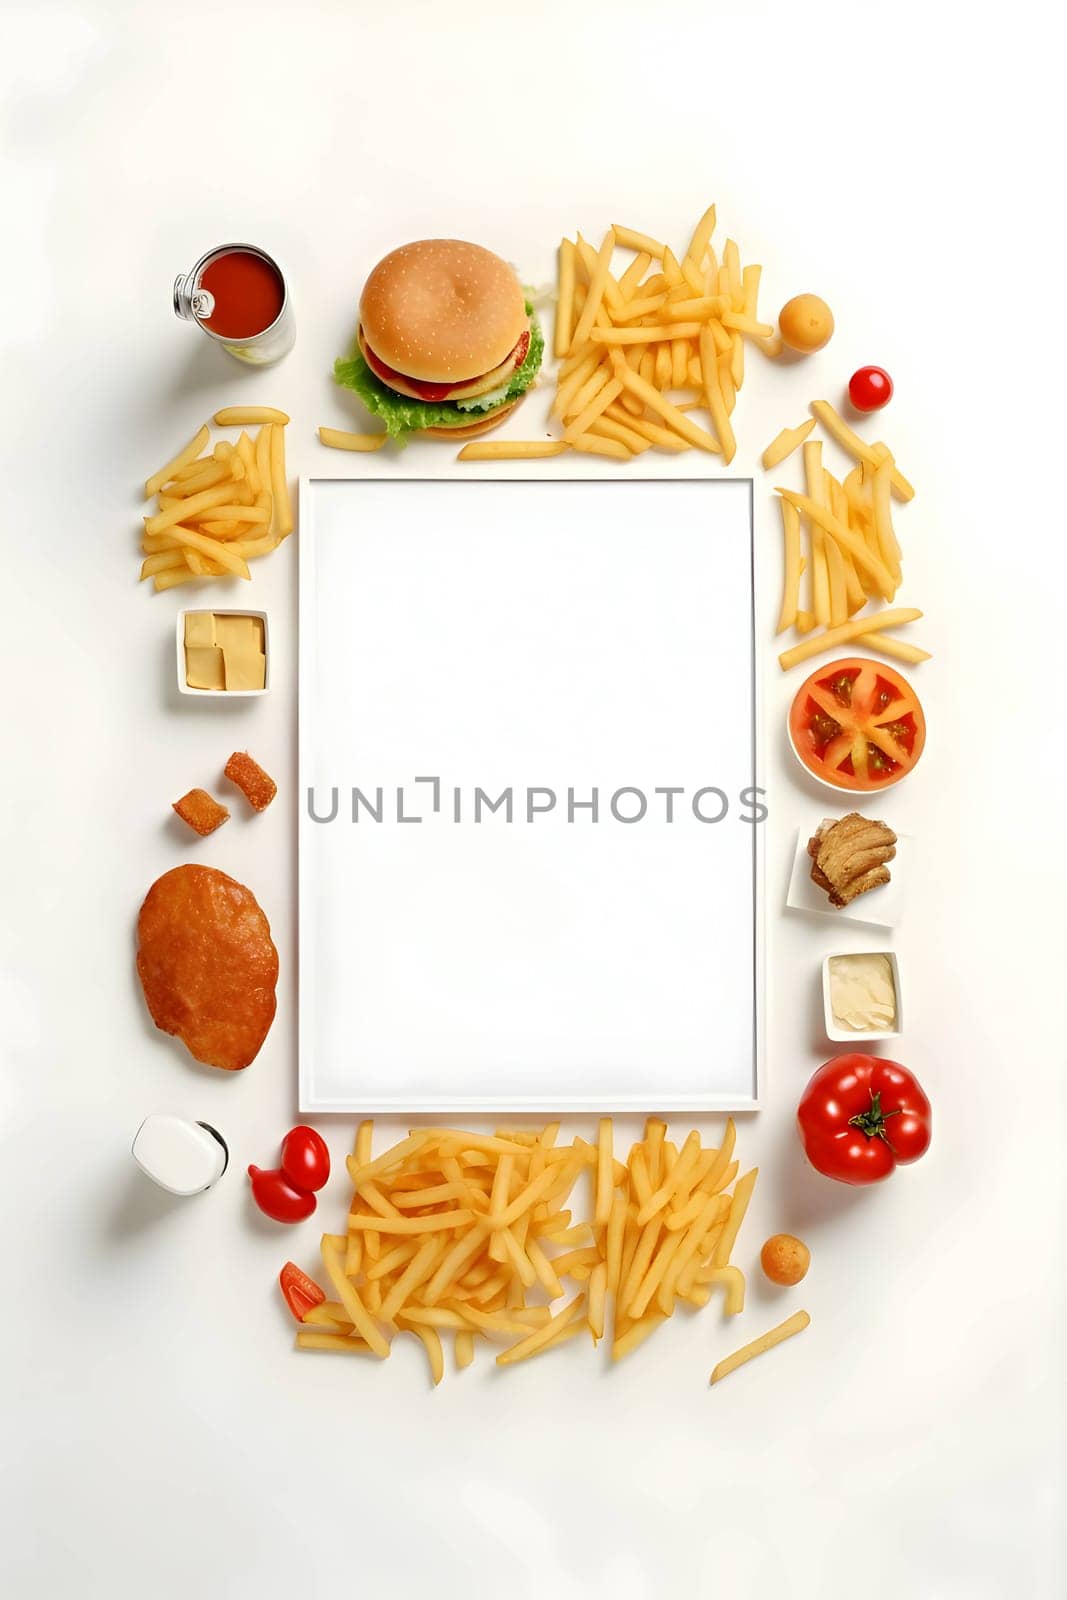 A clean white sheet, an empty canvas, encompassed by a tempting array of French fries and delectable fast food treats.